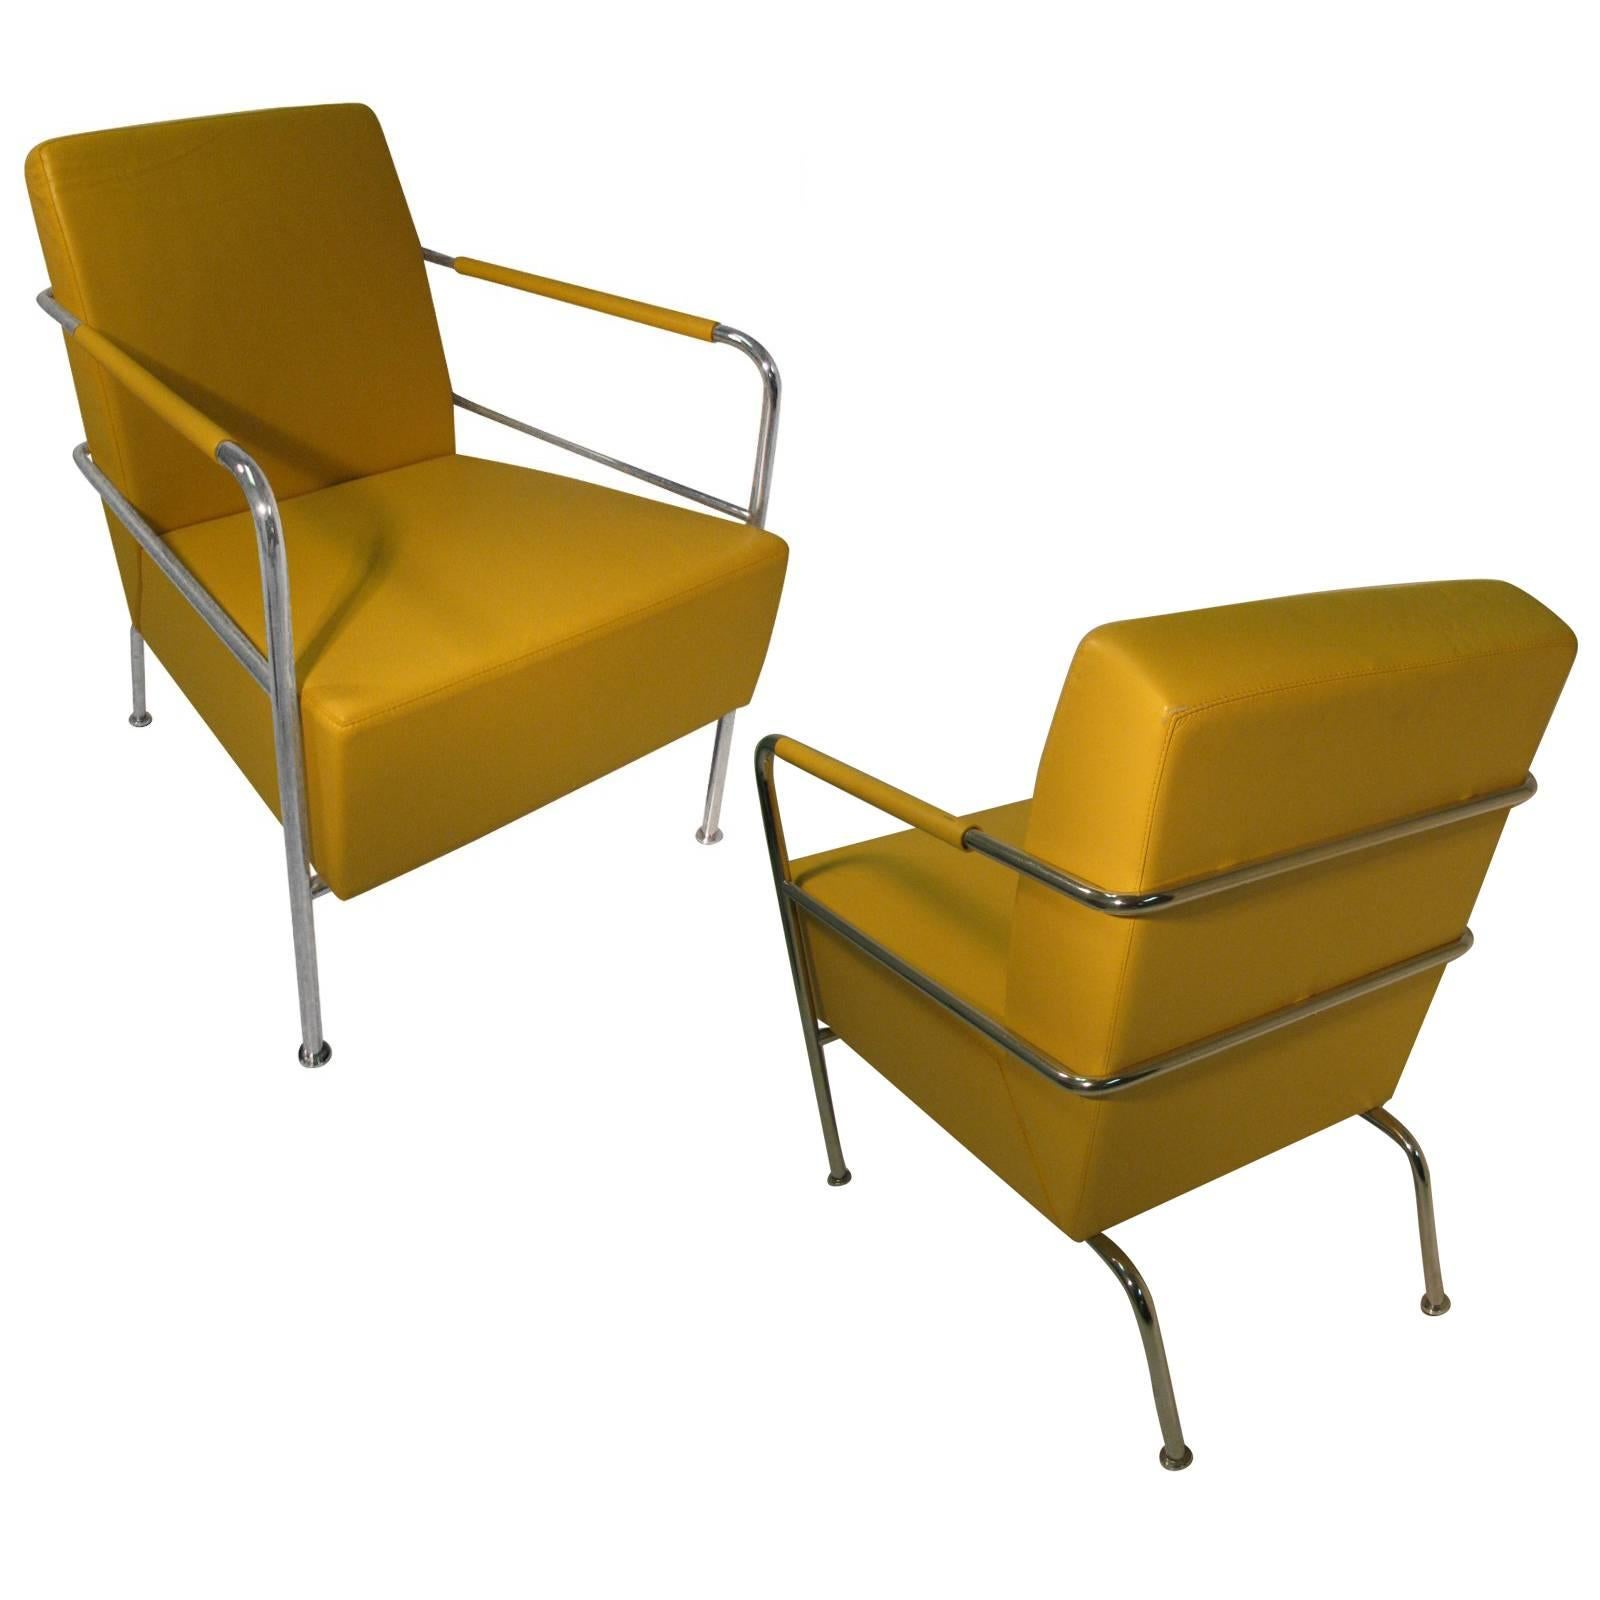 Fabulous Pair of Mid-Century Modern Leather with Chrome Club Lounge Chairs